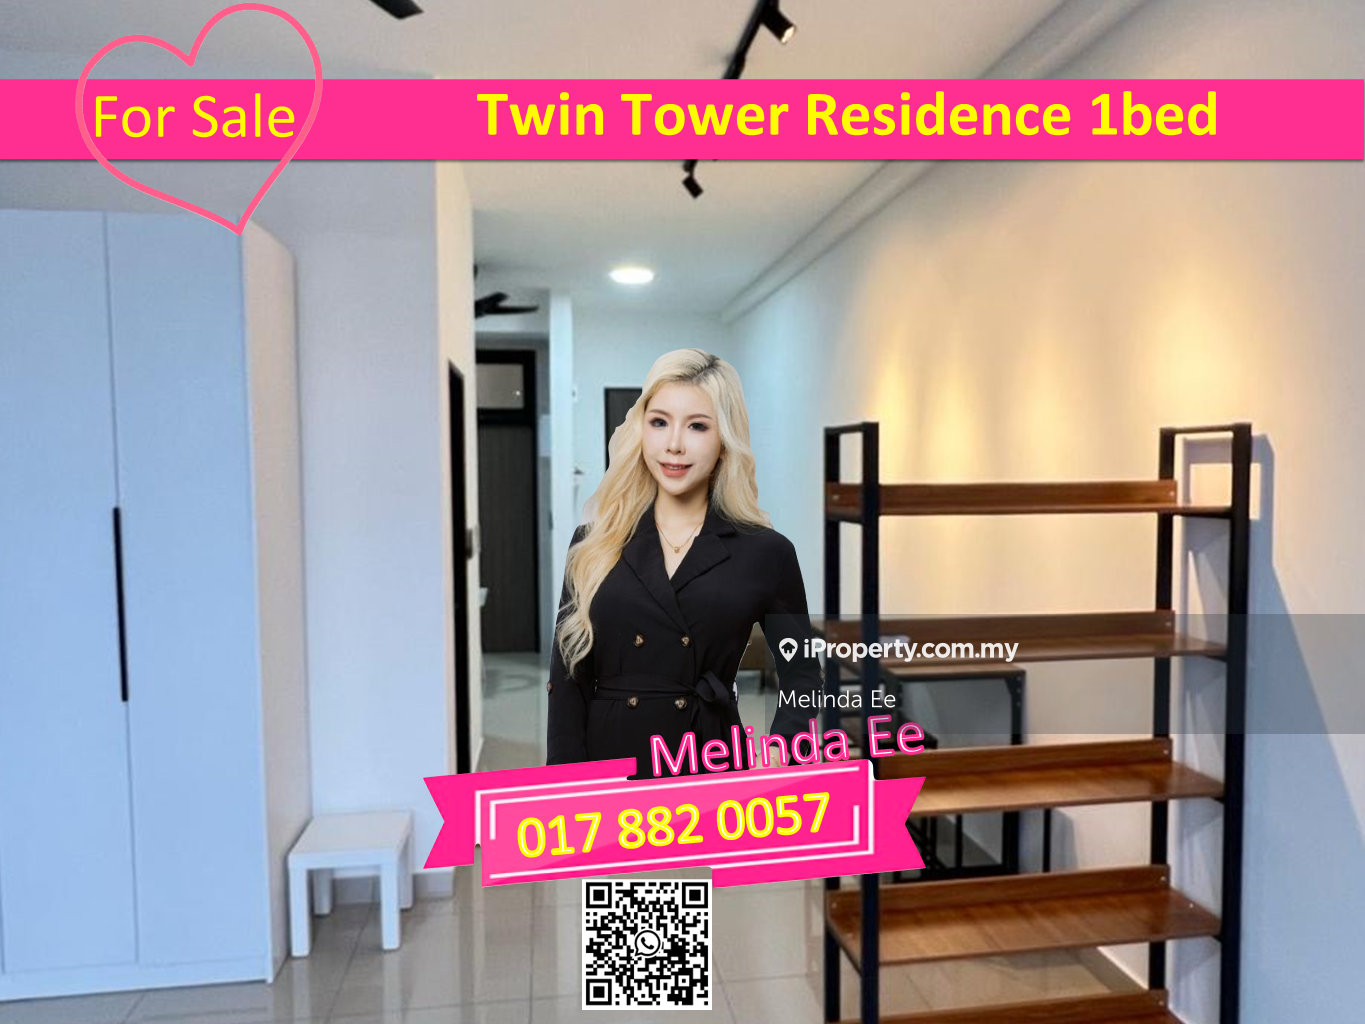 Twin Tower Residence Nice 1bed with Carpark